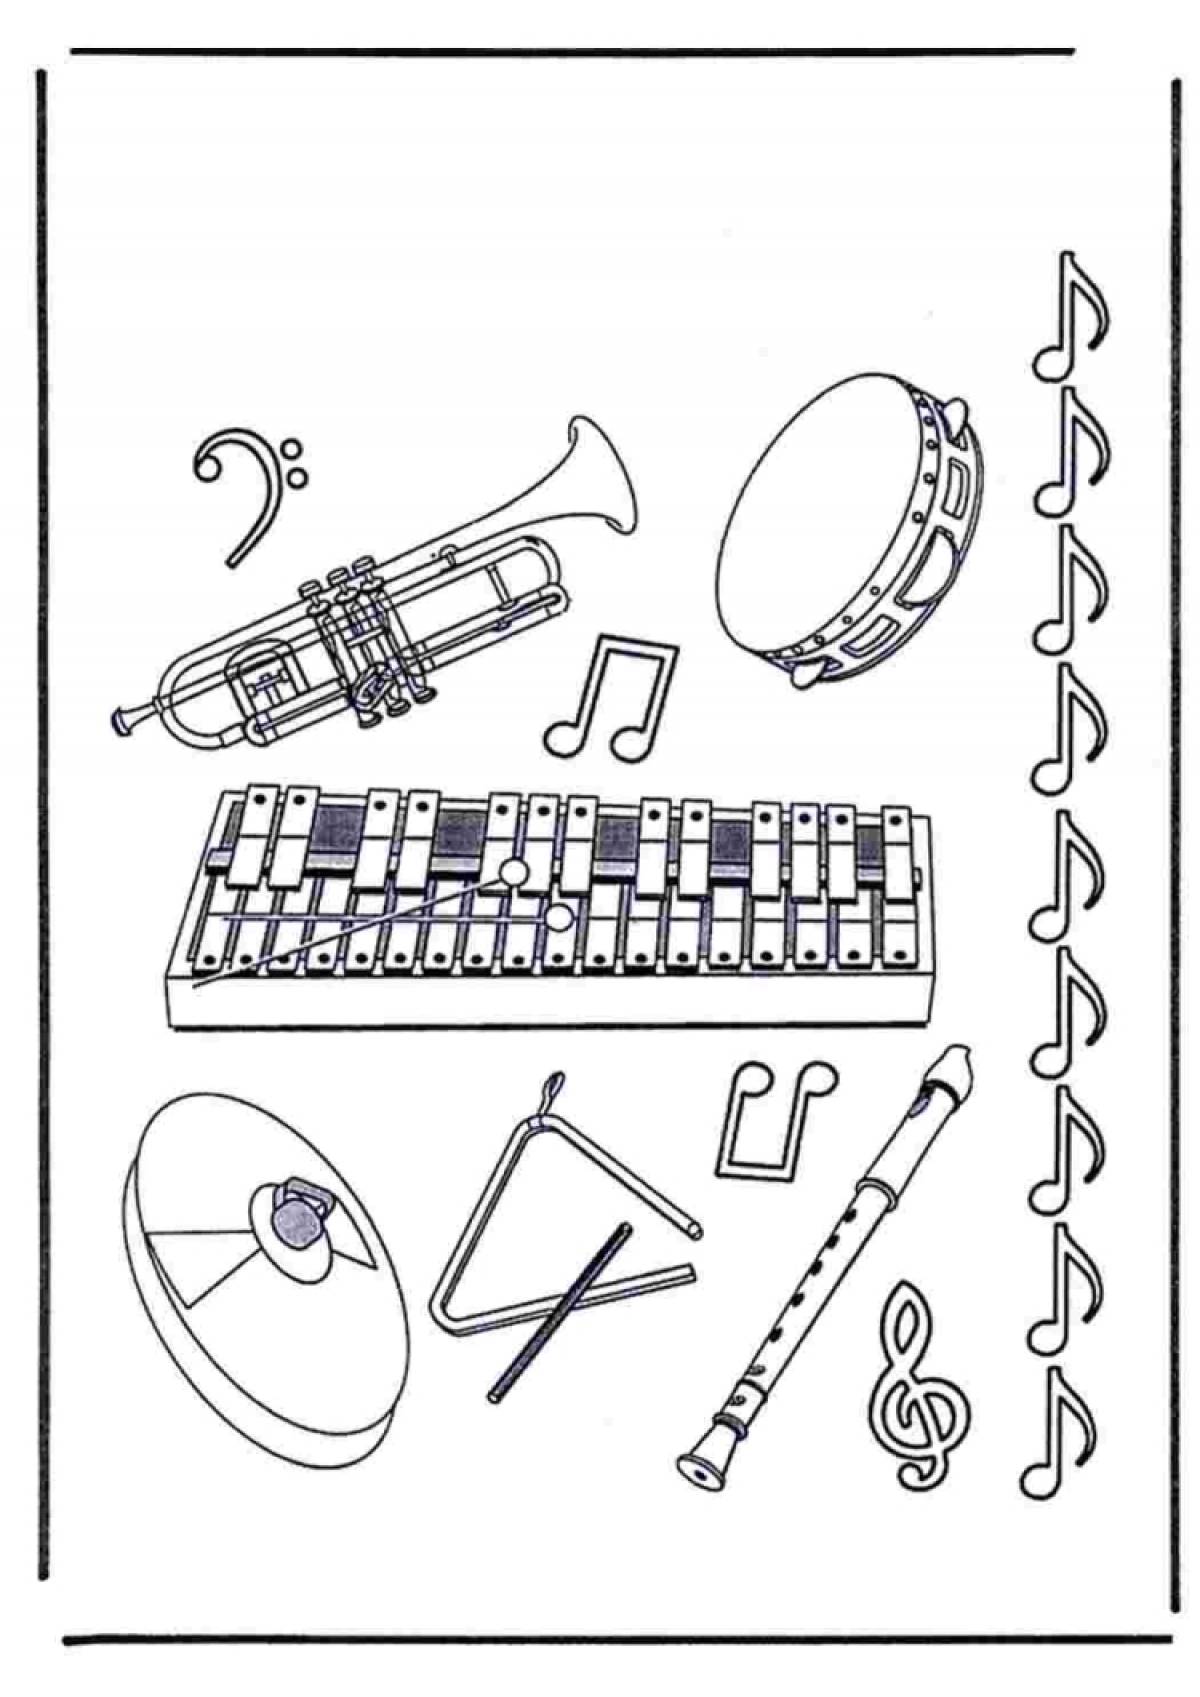 Musical instruments for children 3 4 years old #28